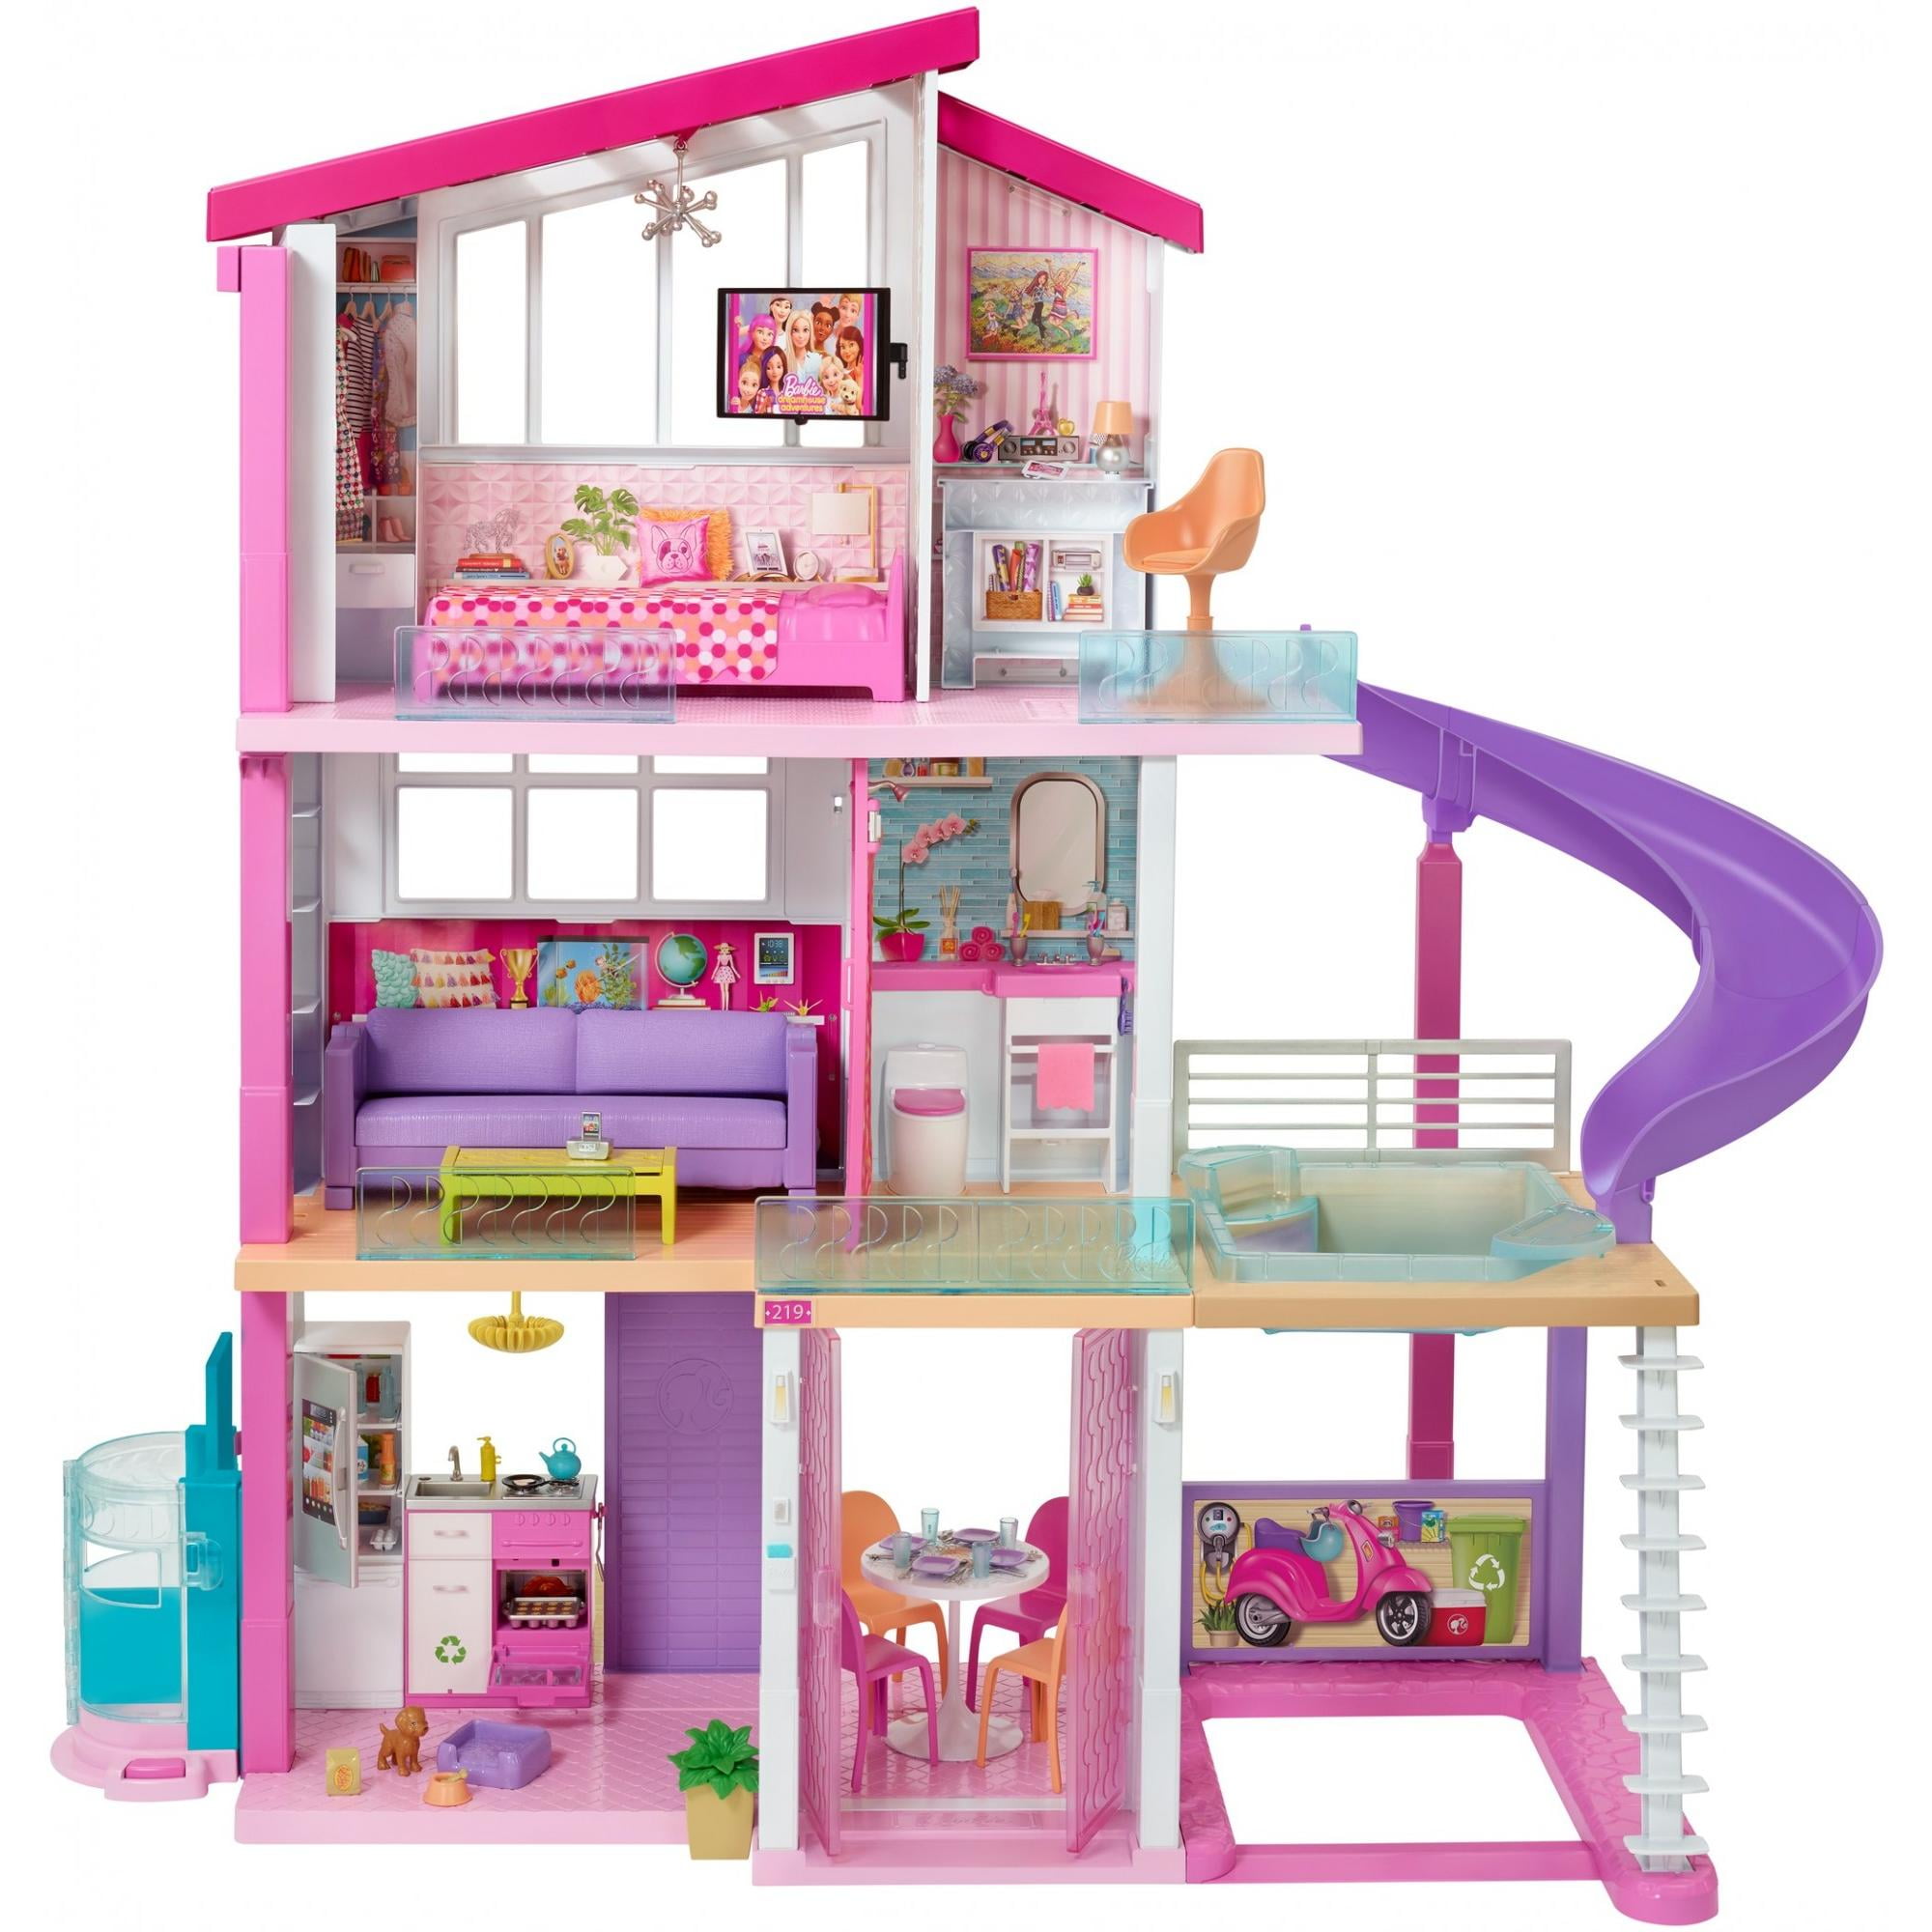 Barbie Dreamhouse 46.5 inch Dollhouse with Elevator, Pool, Slide and 70 Accessories Including Furniture and Household Items, Gift for 3 to 7 Year Olds, assembly required